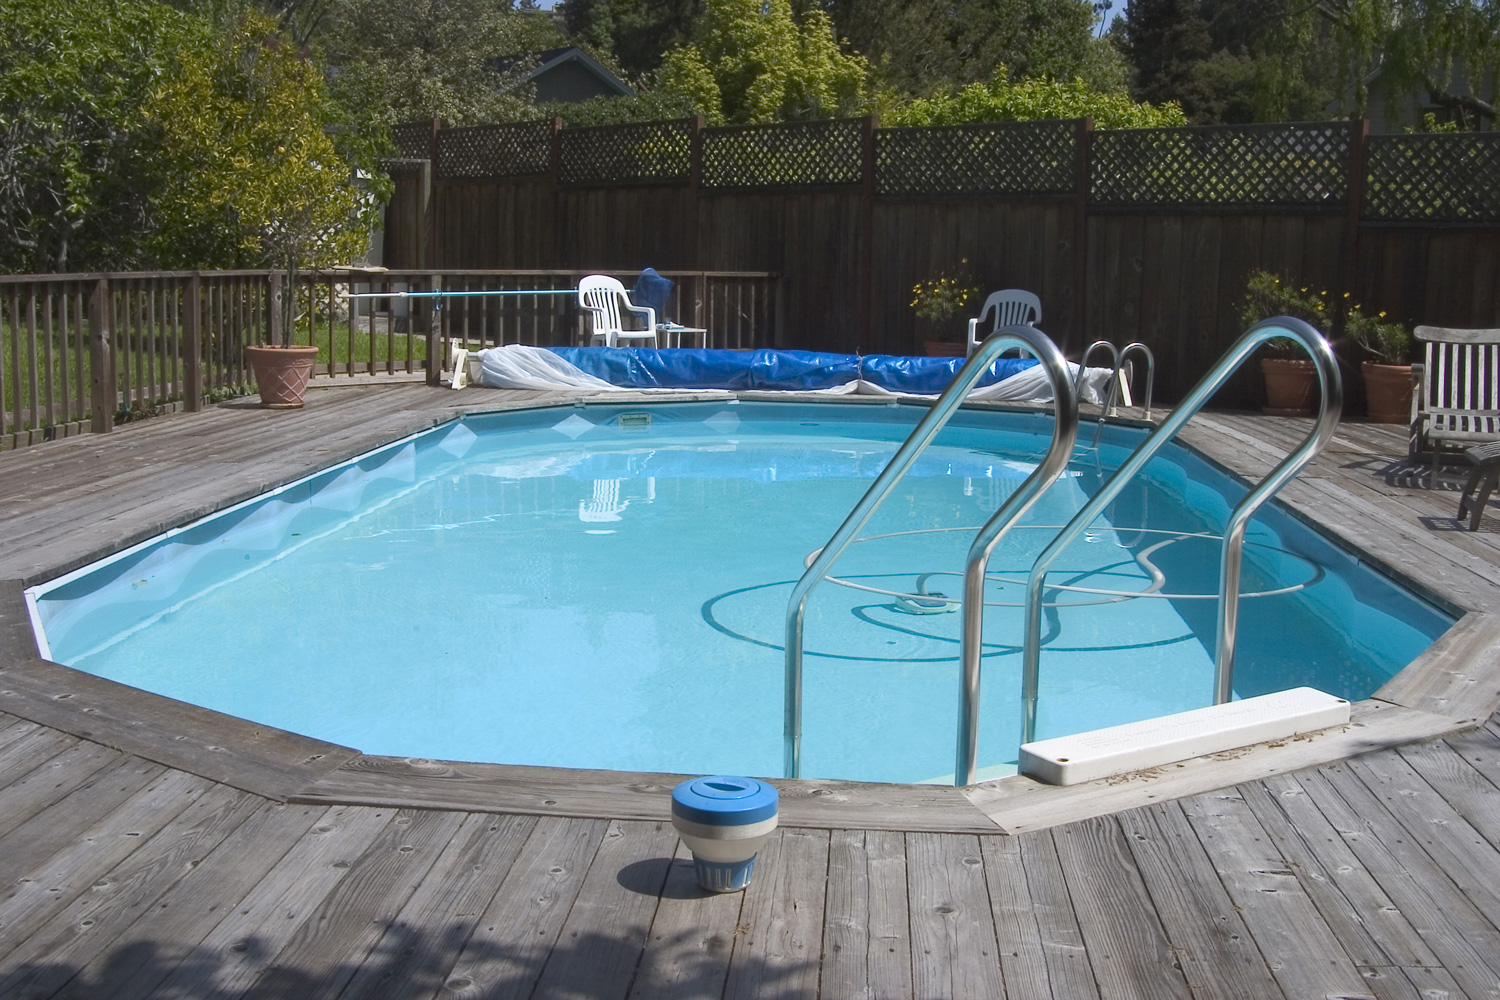 An above ground Doughboy swimming pool surrounded by decking.